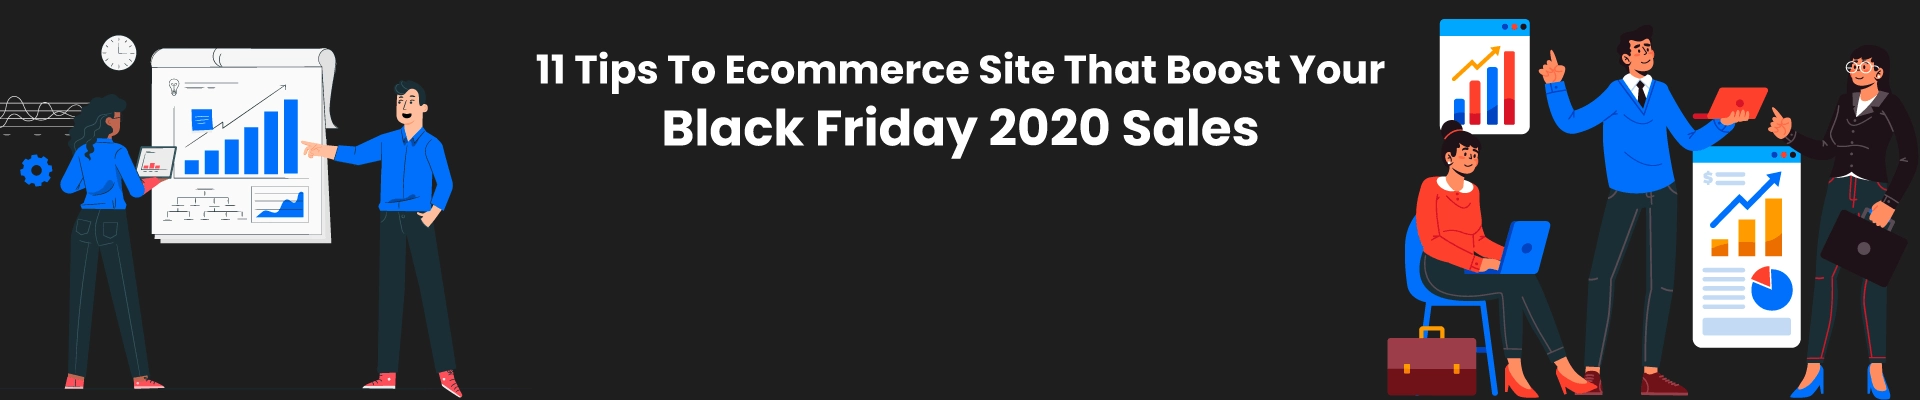 boost-your-black-friday-2020-sales